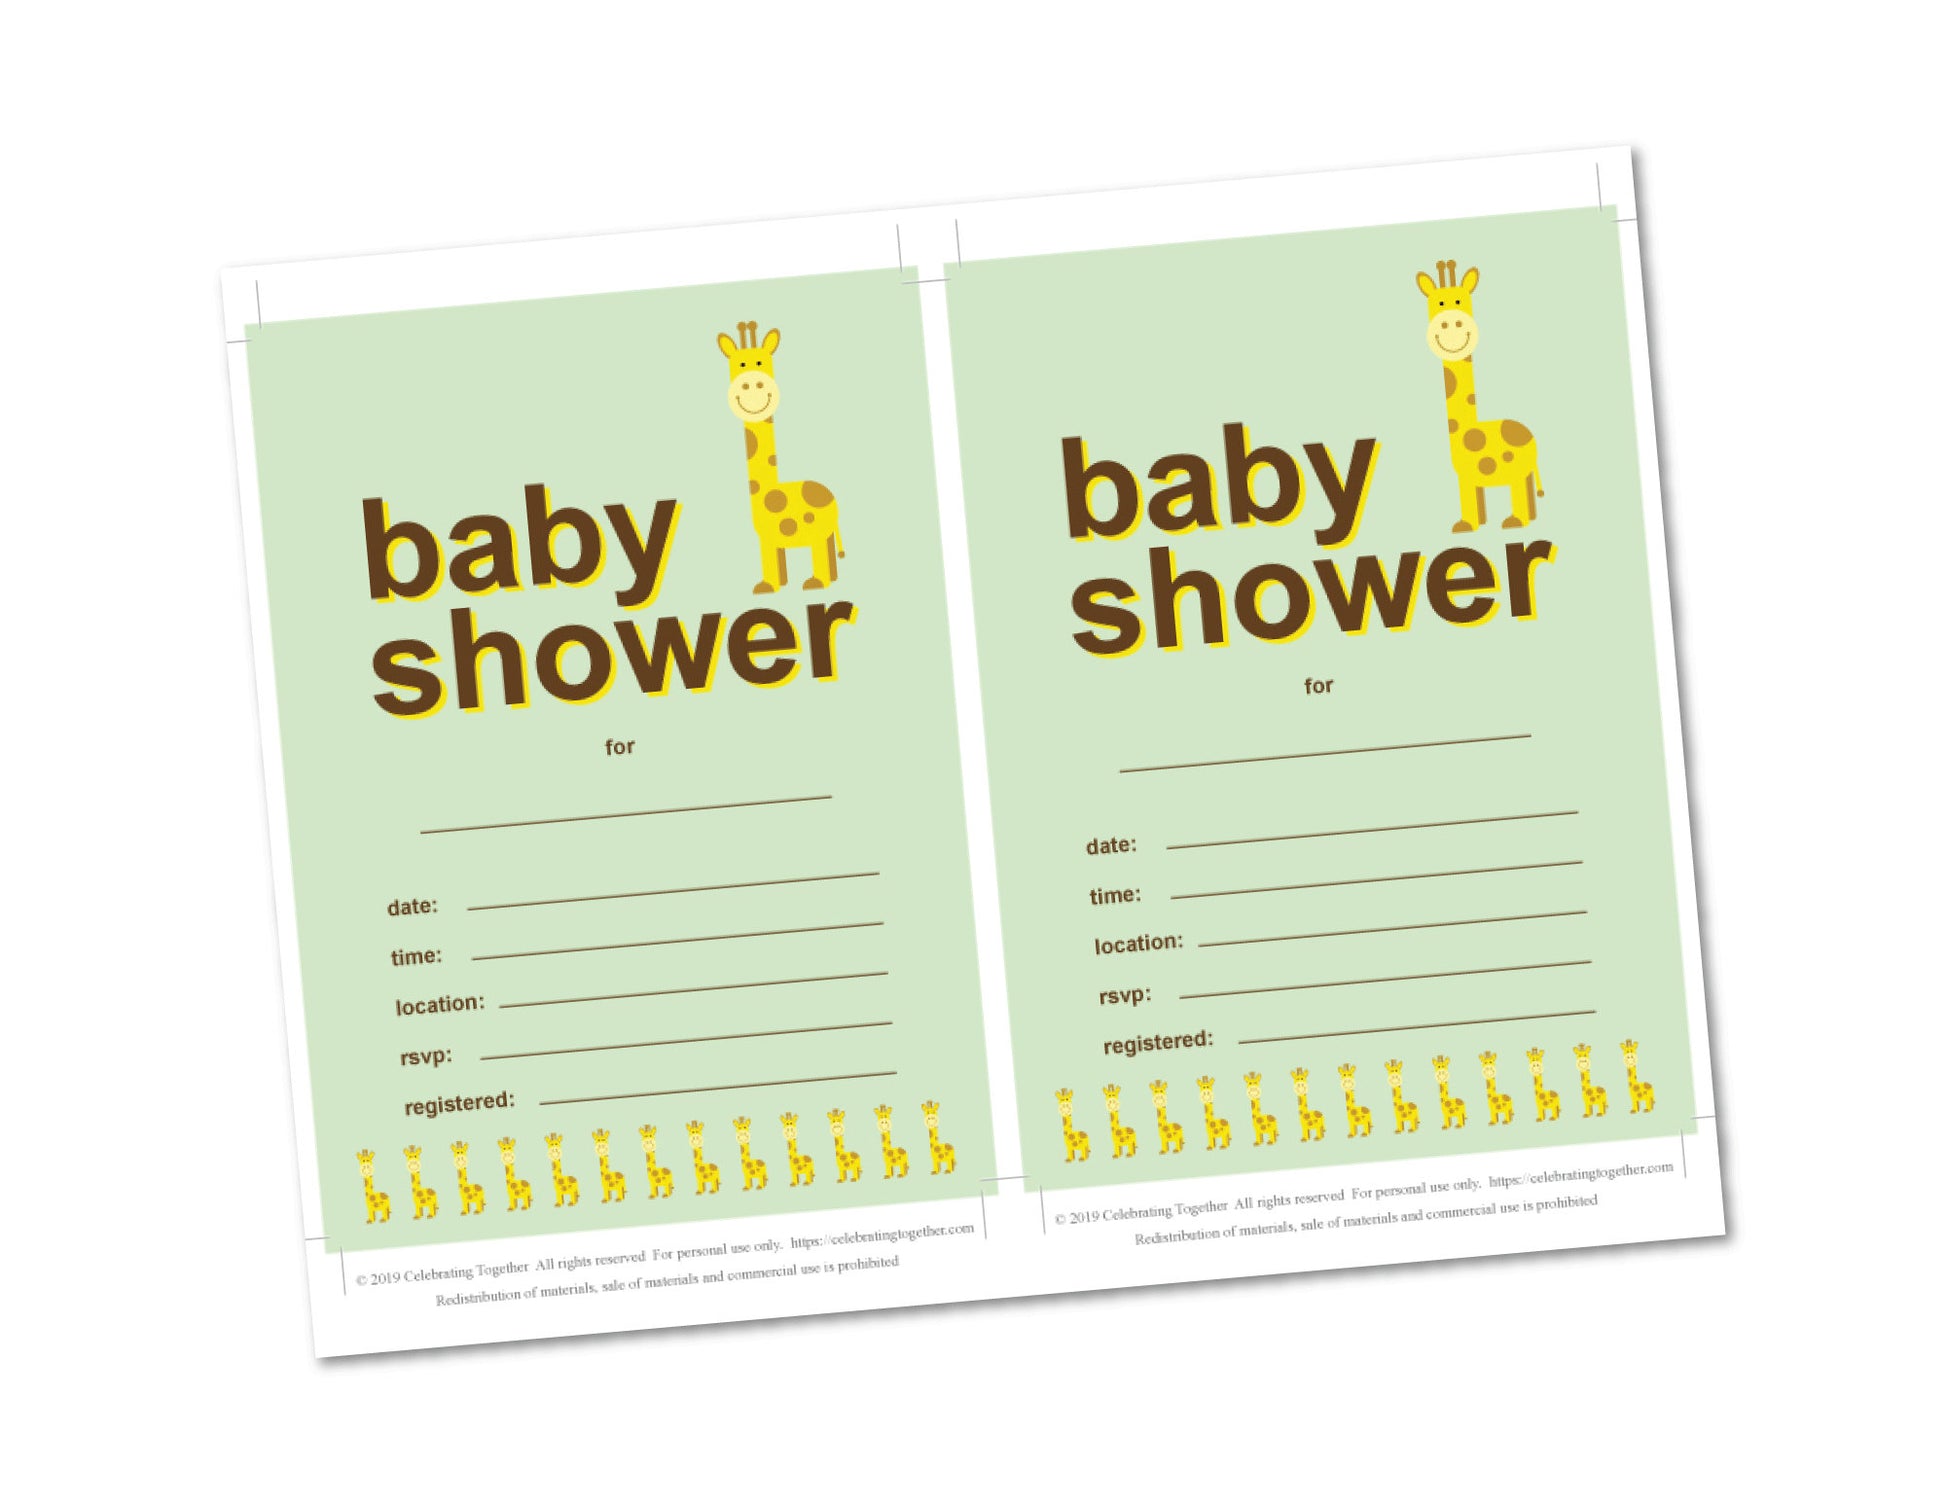 Printable zoo baby shower invitations - Celebrating Together